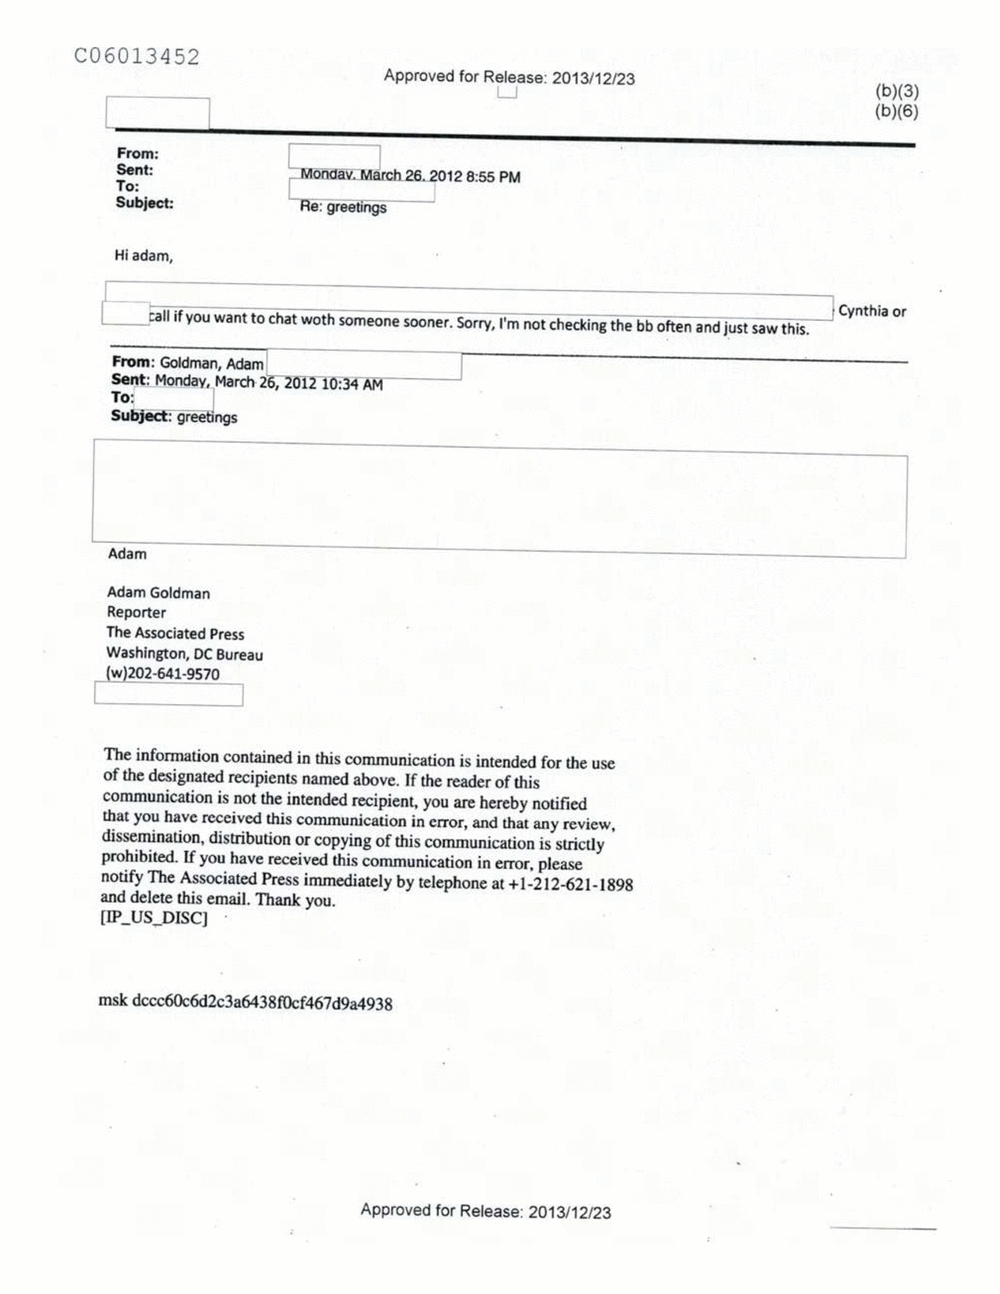 Page 320 from Email Correspondence Between Reporters and CIA Flacks